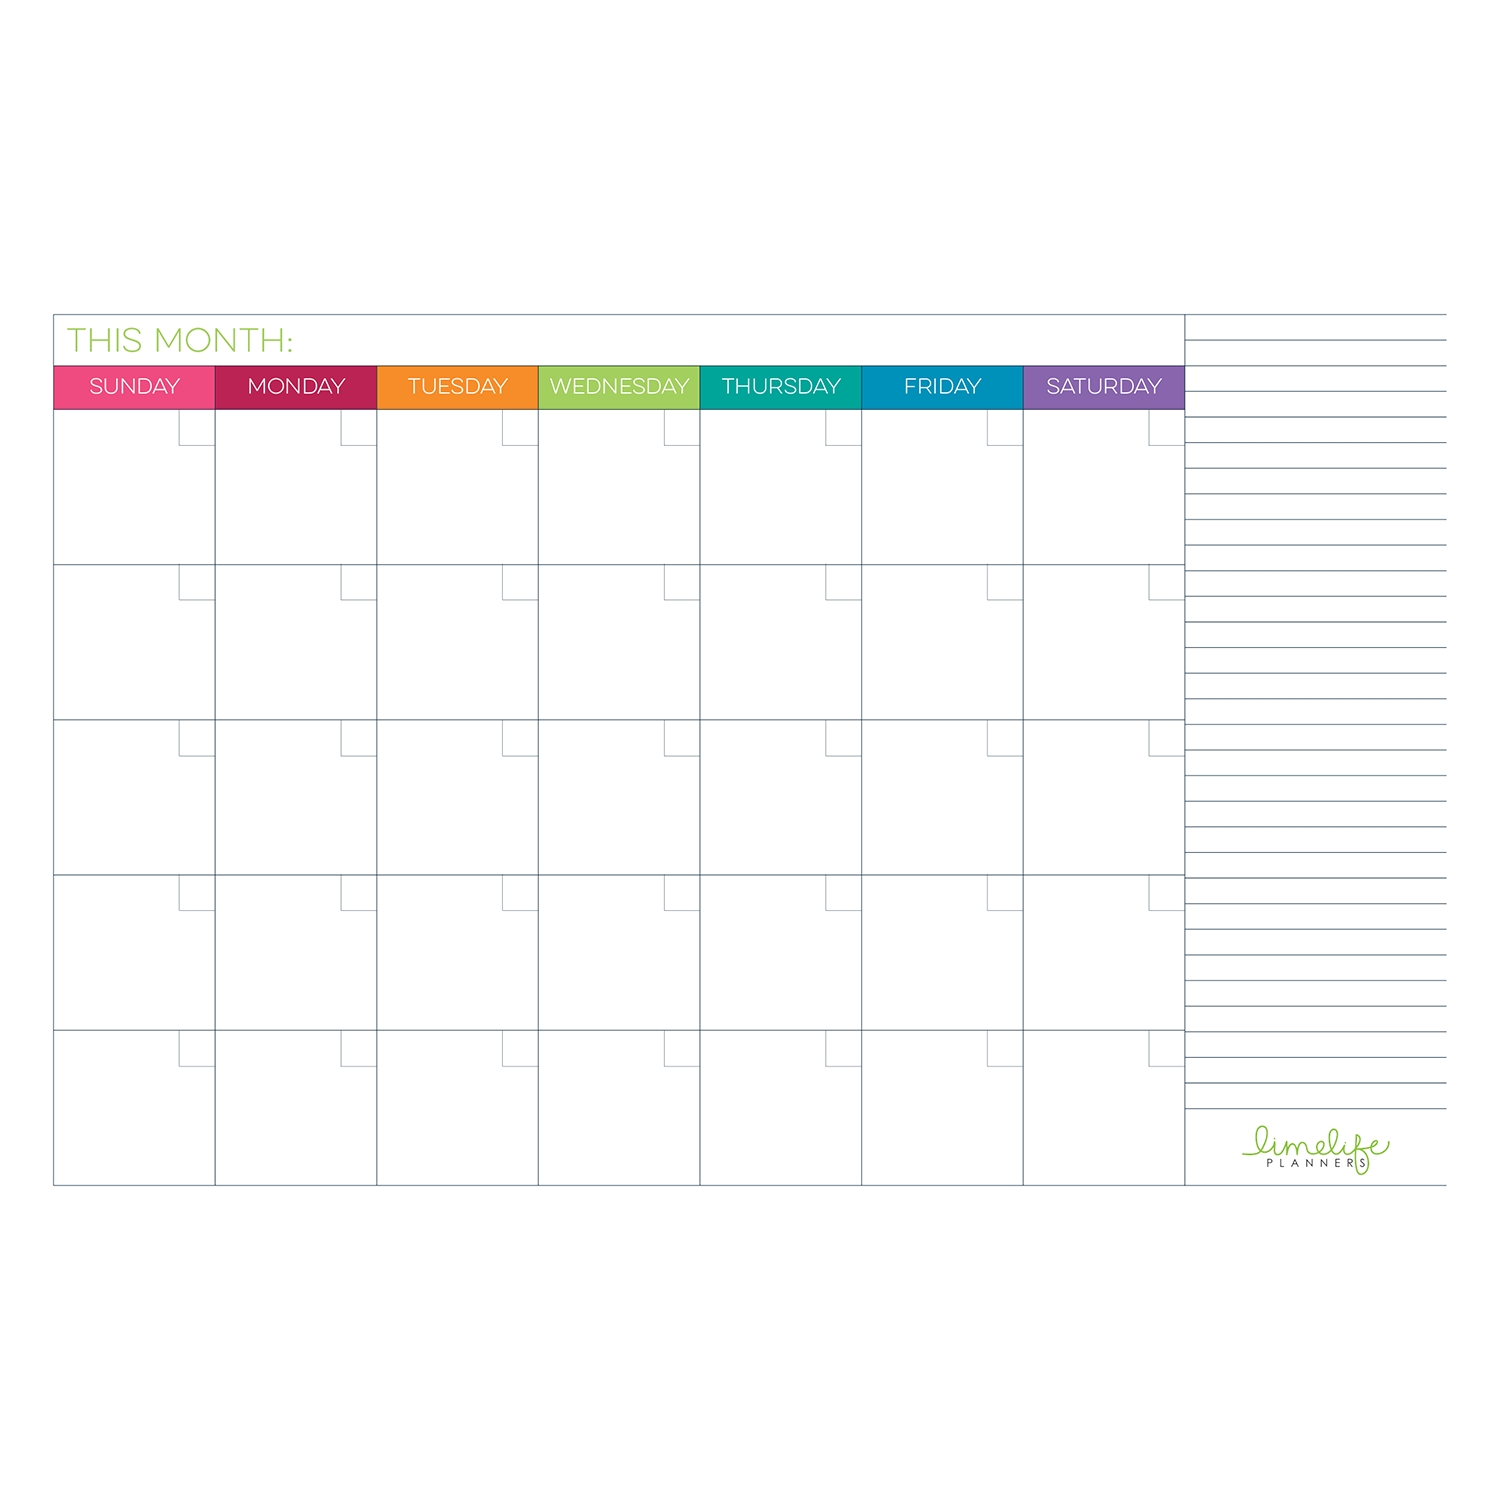 11X17 In. Calendar Page | Planner Pages, Planner Printables